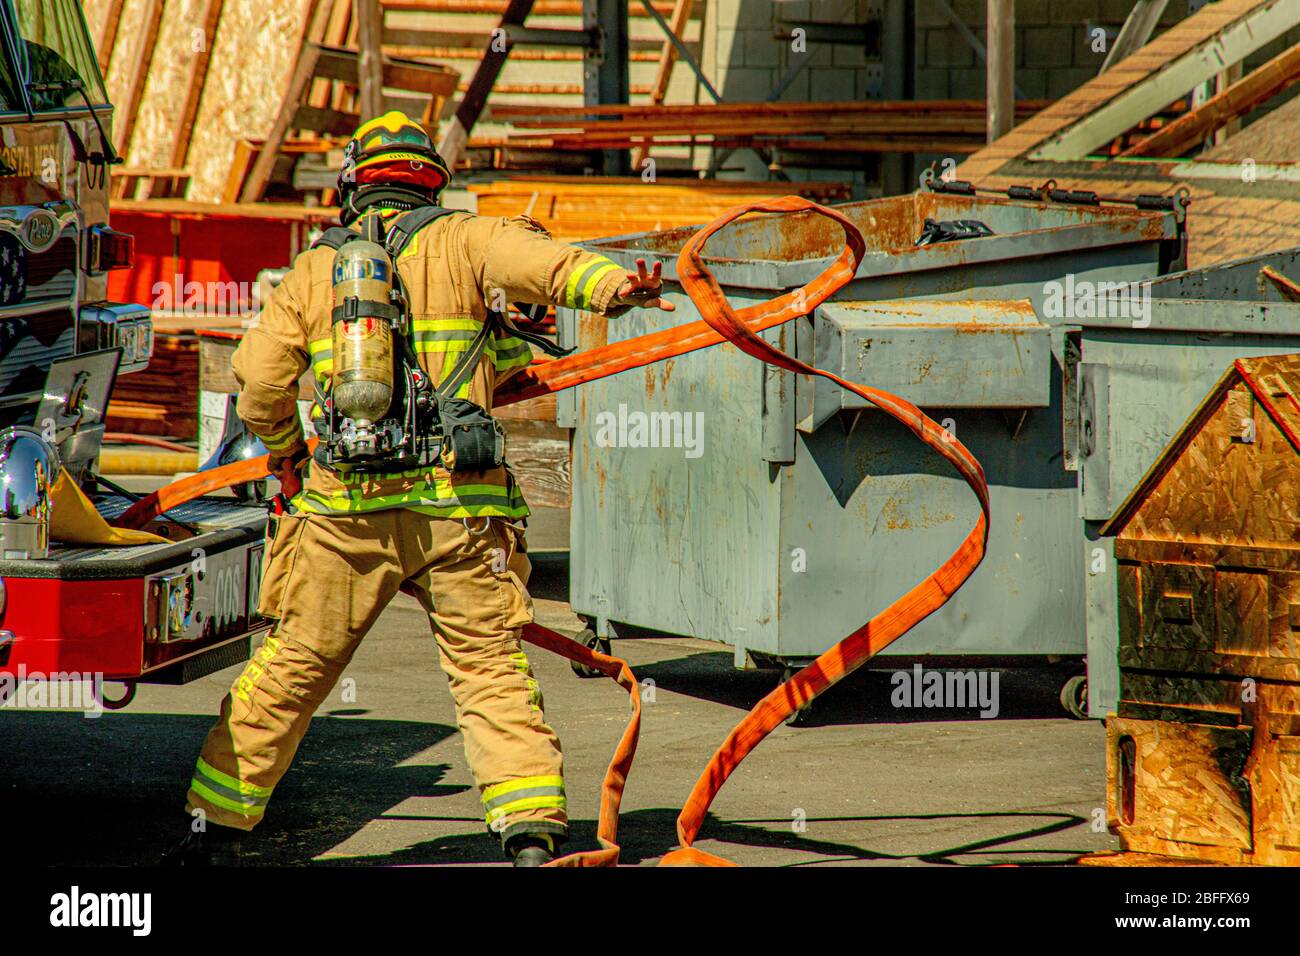 With air tank and helmet, a Hispanic fireman quickly uncoils water hose at the scene of an industrial blaze in Costa Mesa, CA. Stock Photo